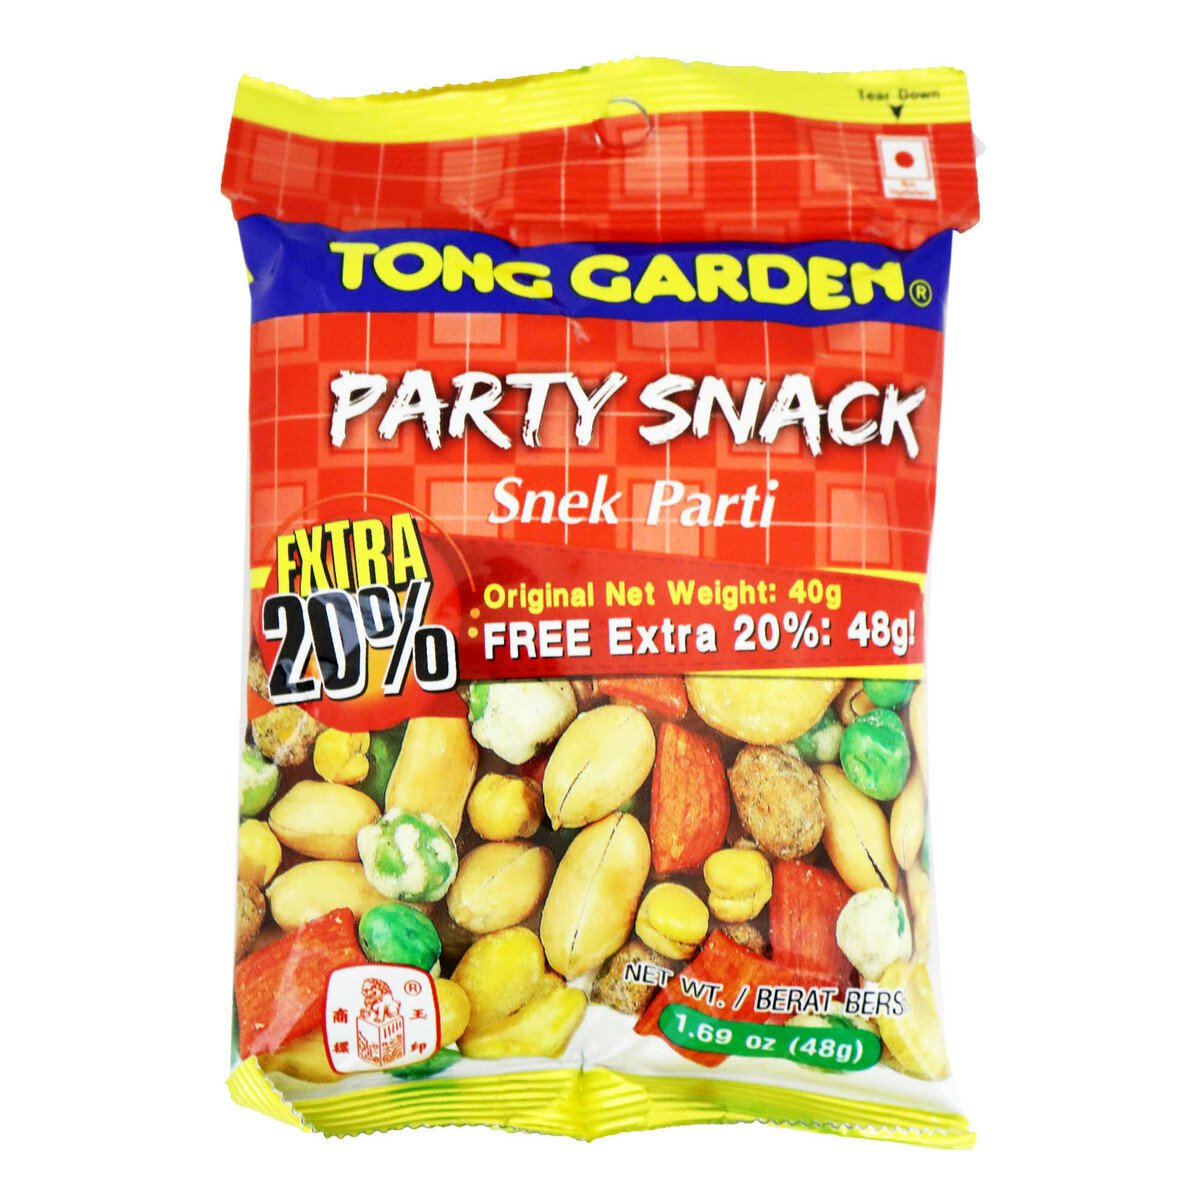 Tong Garden Party Snack 40g Online At